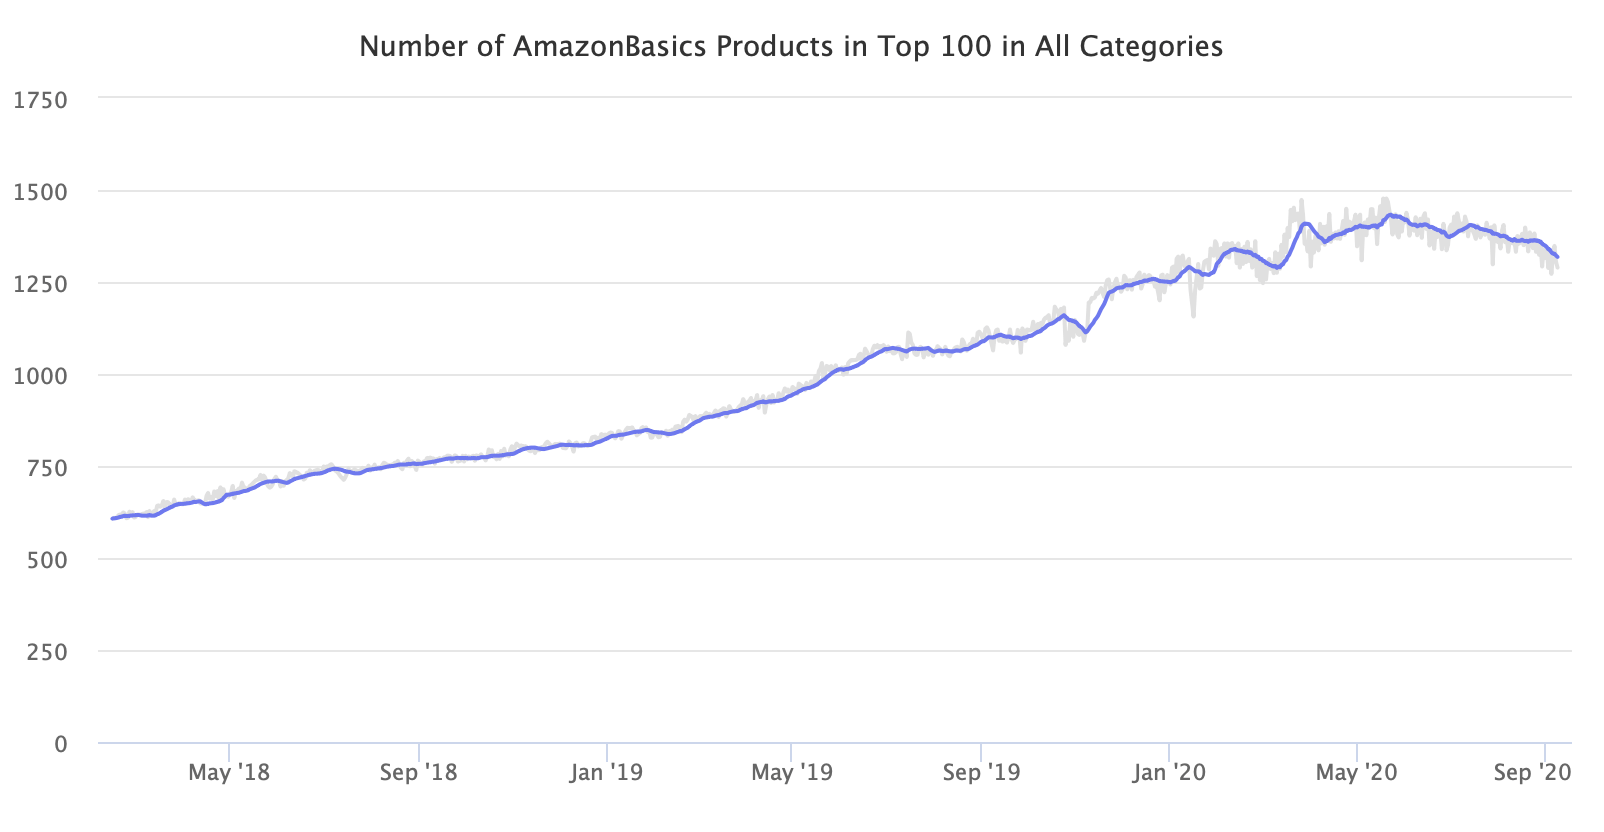 Number of AmazonBasics Products in Top 100 in All Categories